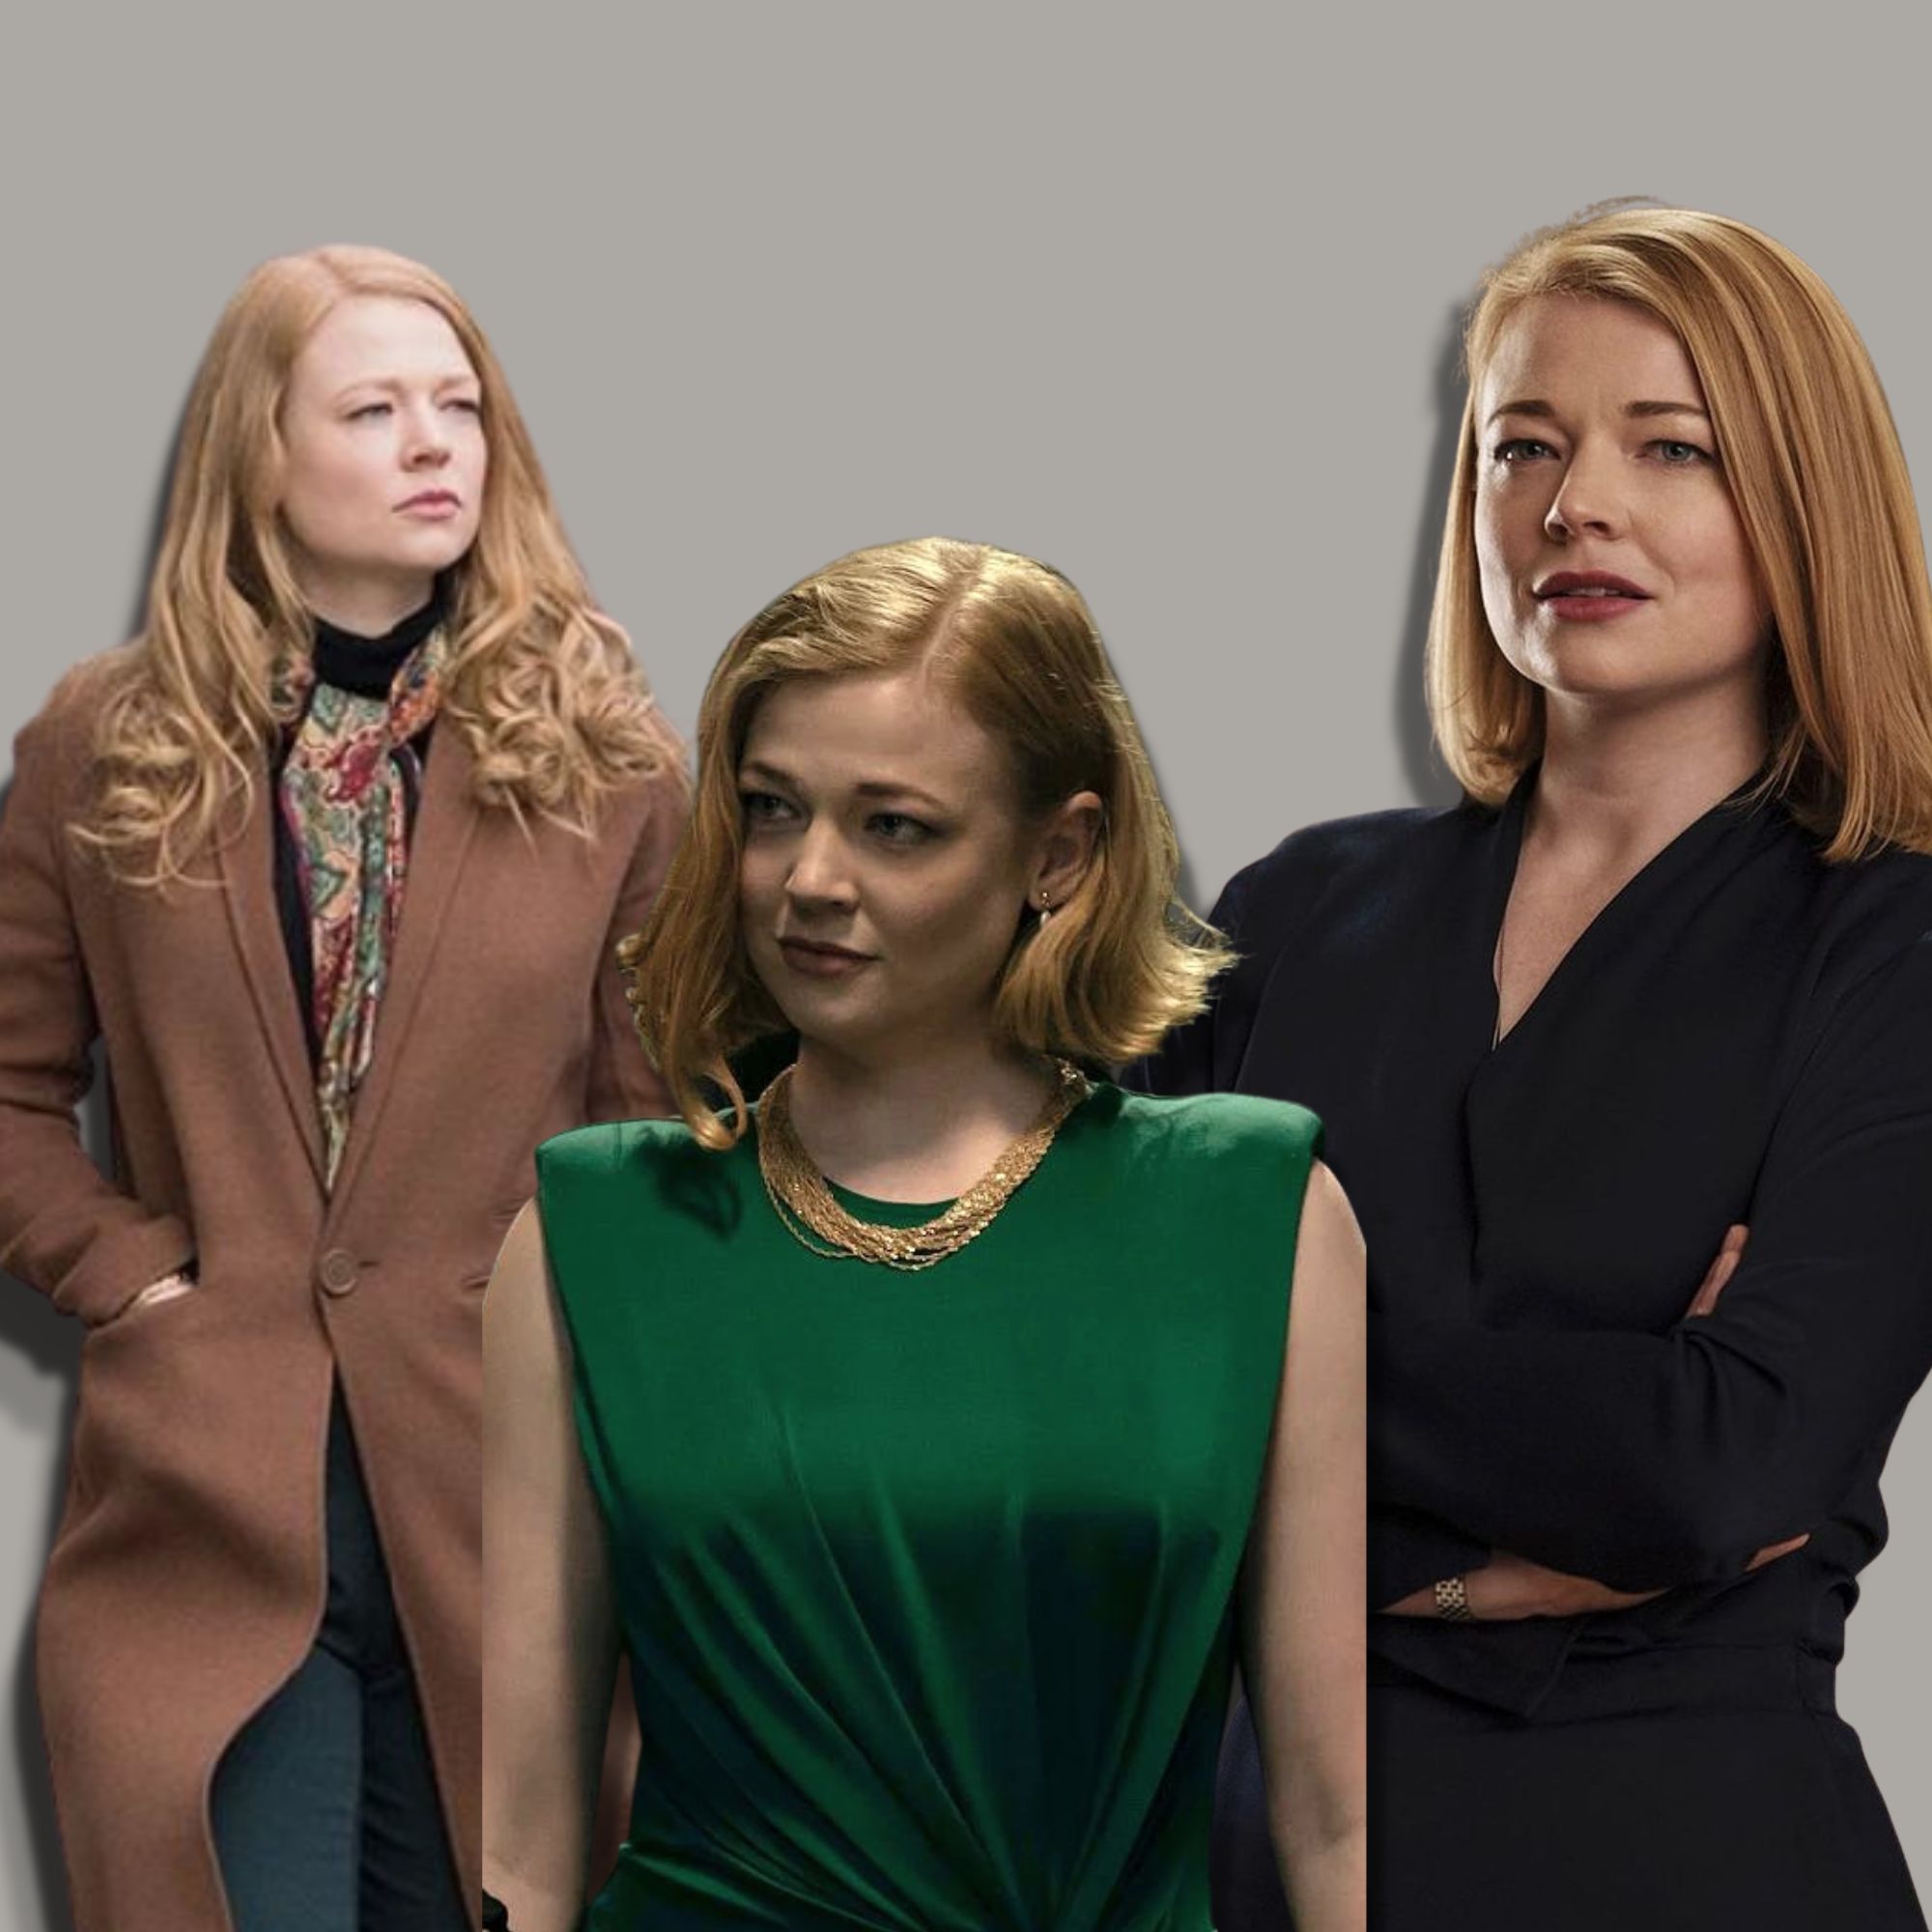 Siobhan Roy, played by Sarah Snook, undergoes a 